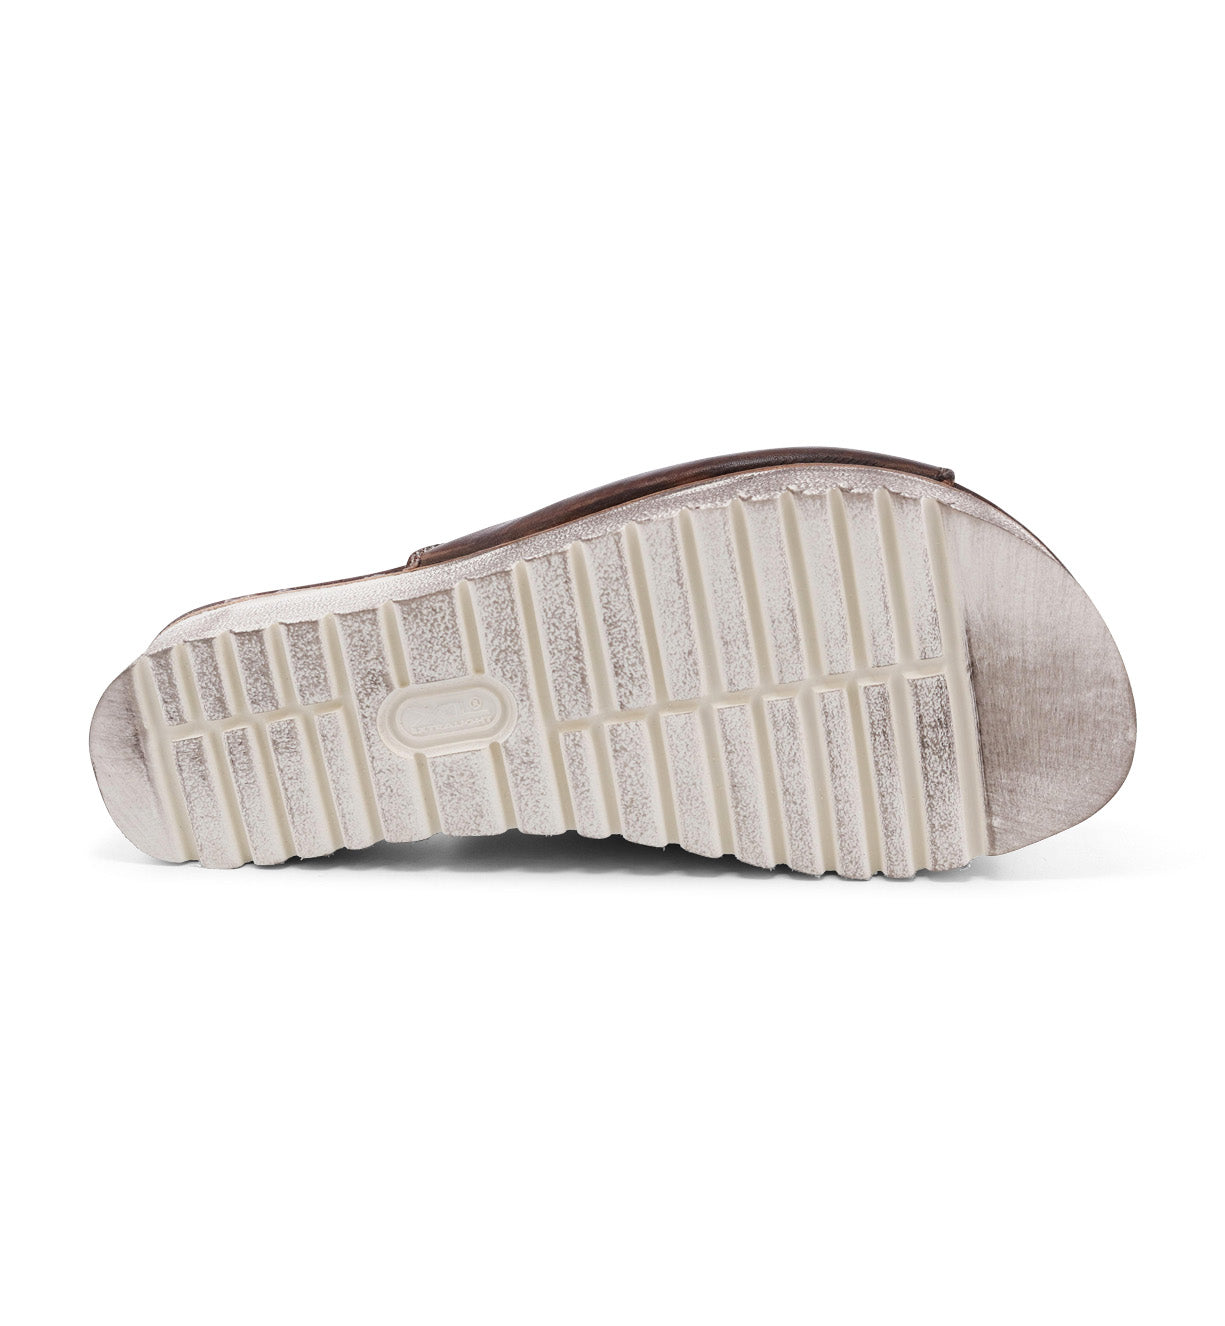 The back view of a Bed Stu Fairlee II women's sandal with a white sole.